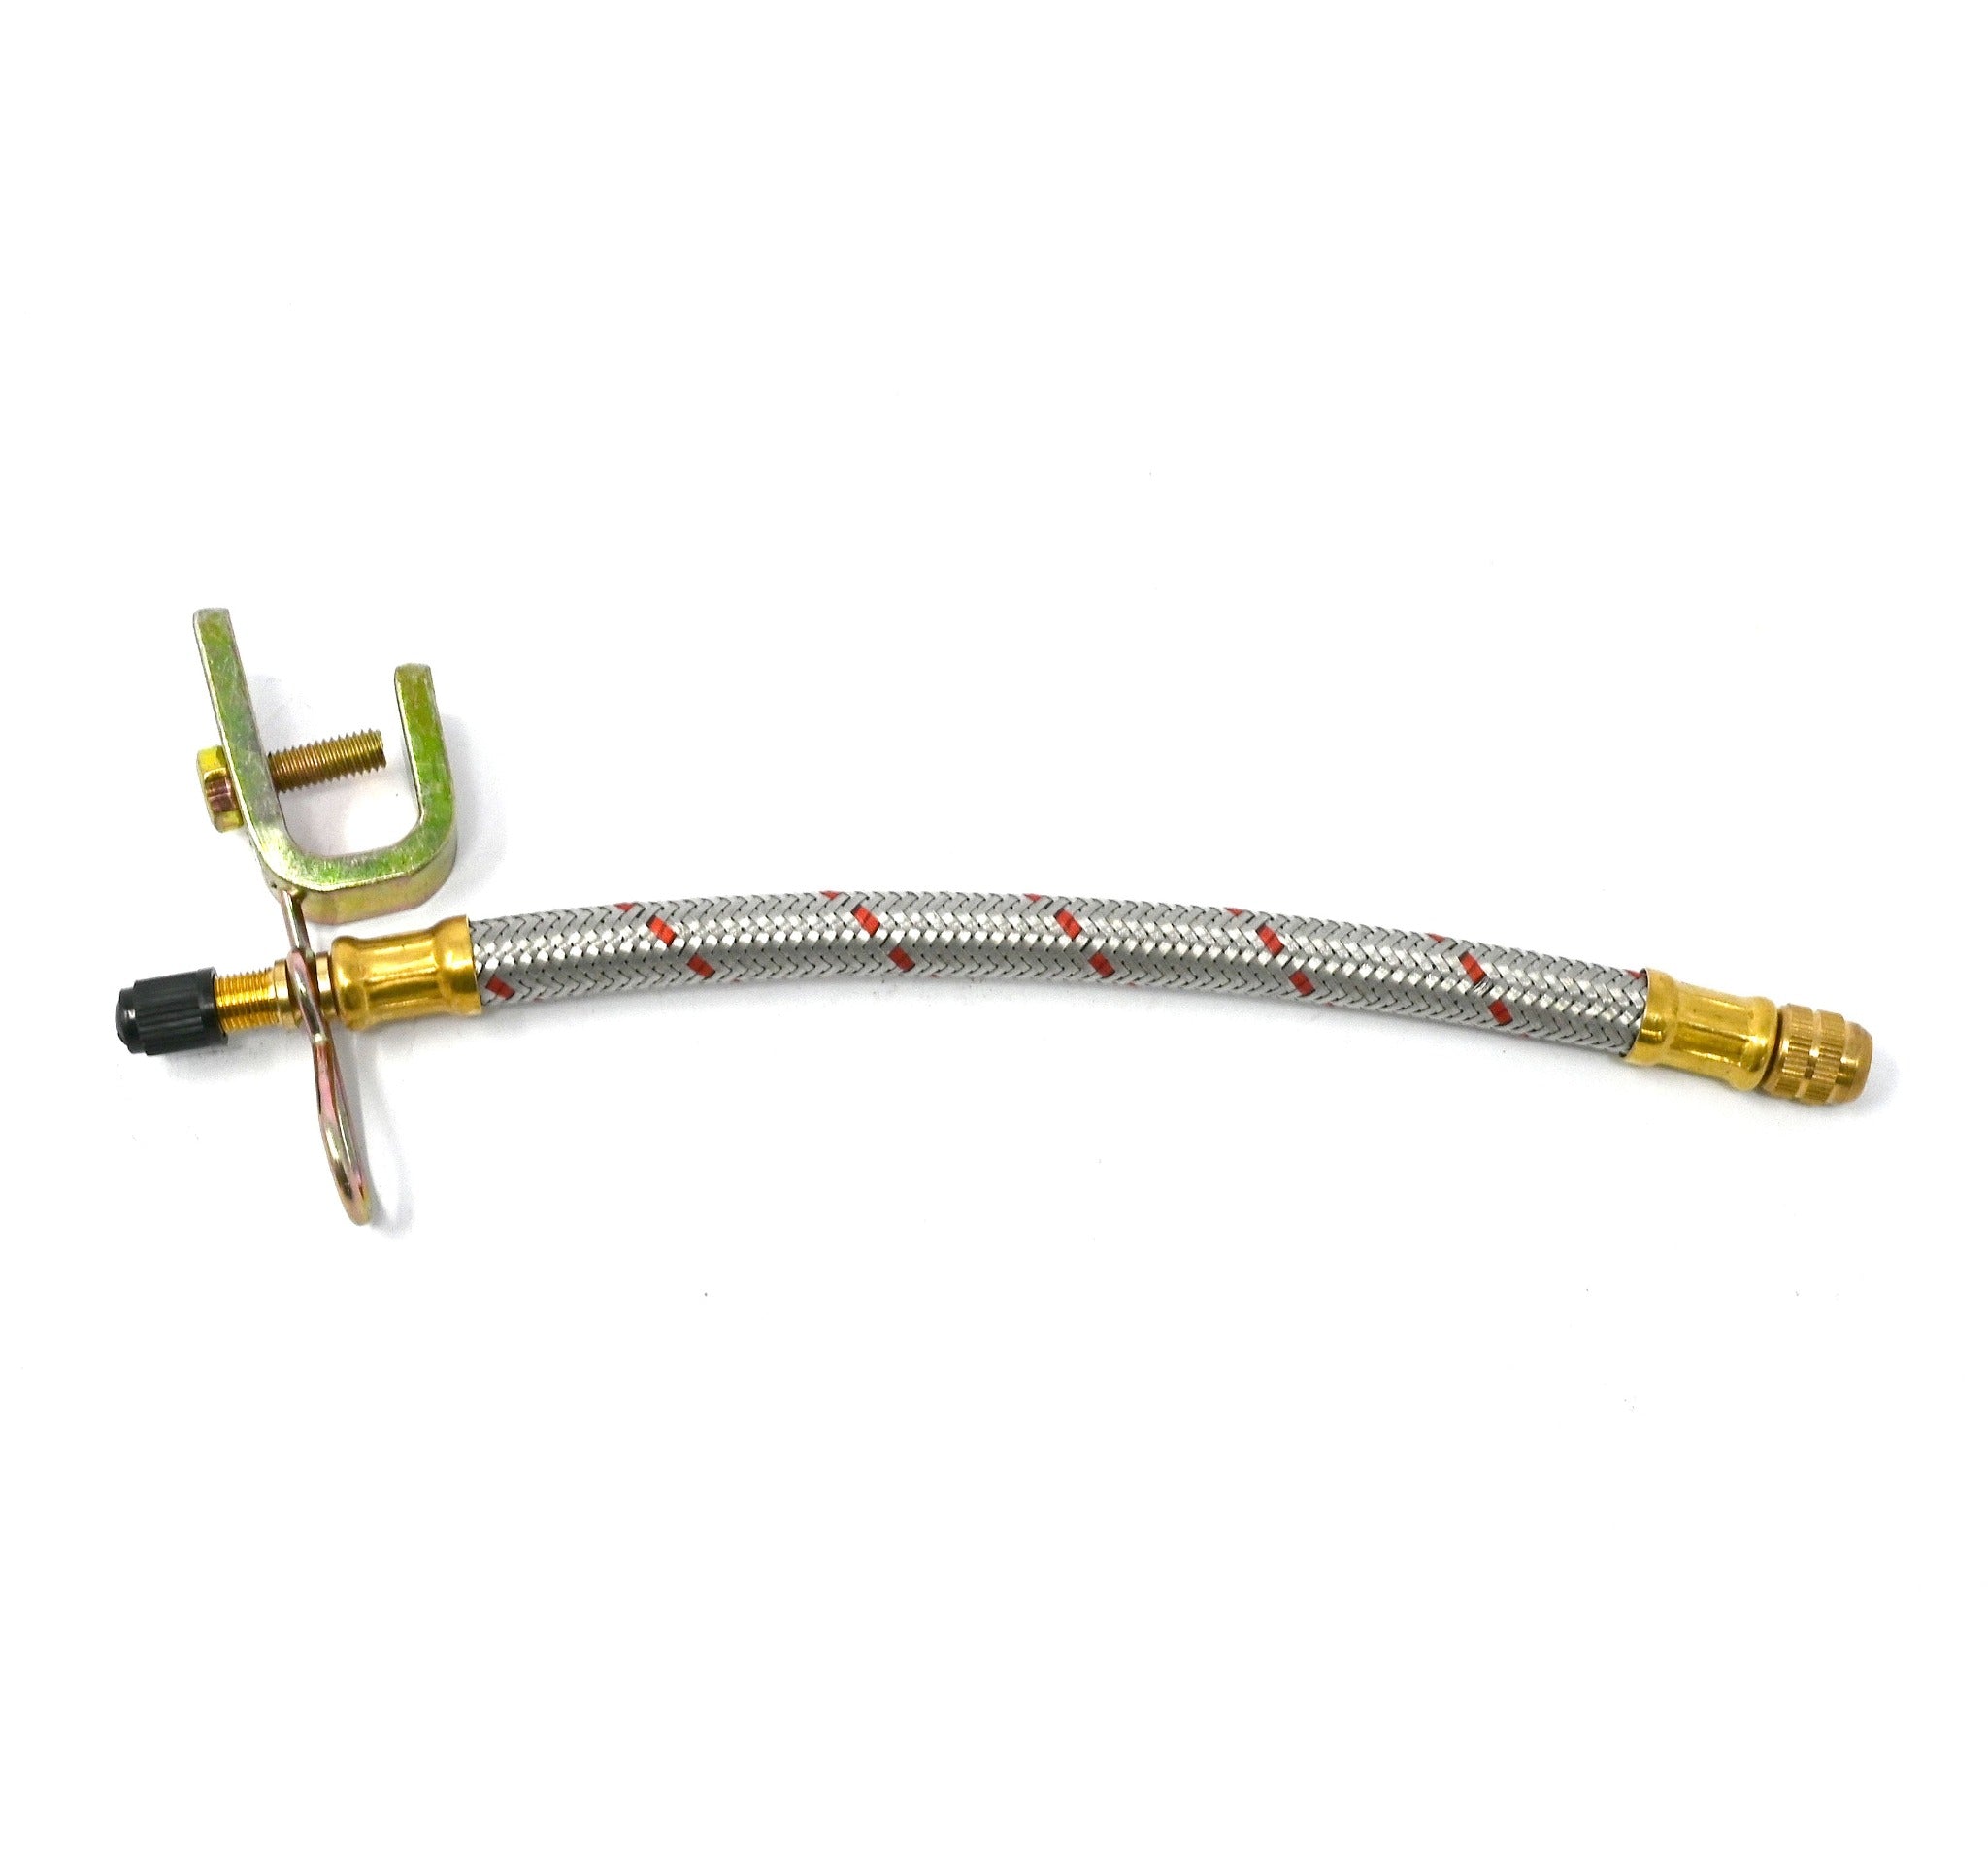 Flexible Braided Metal Rubber Valve Extension   8.25 Inches (210mm)